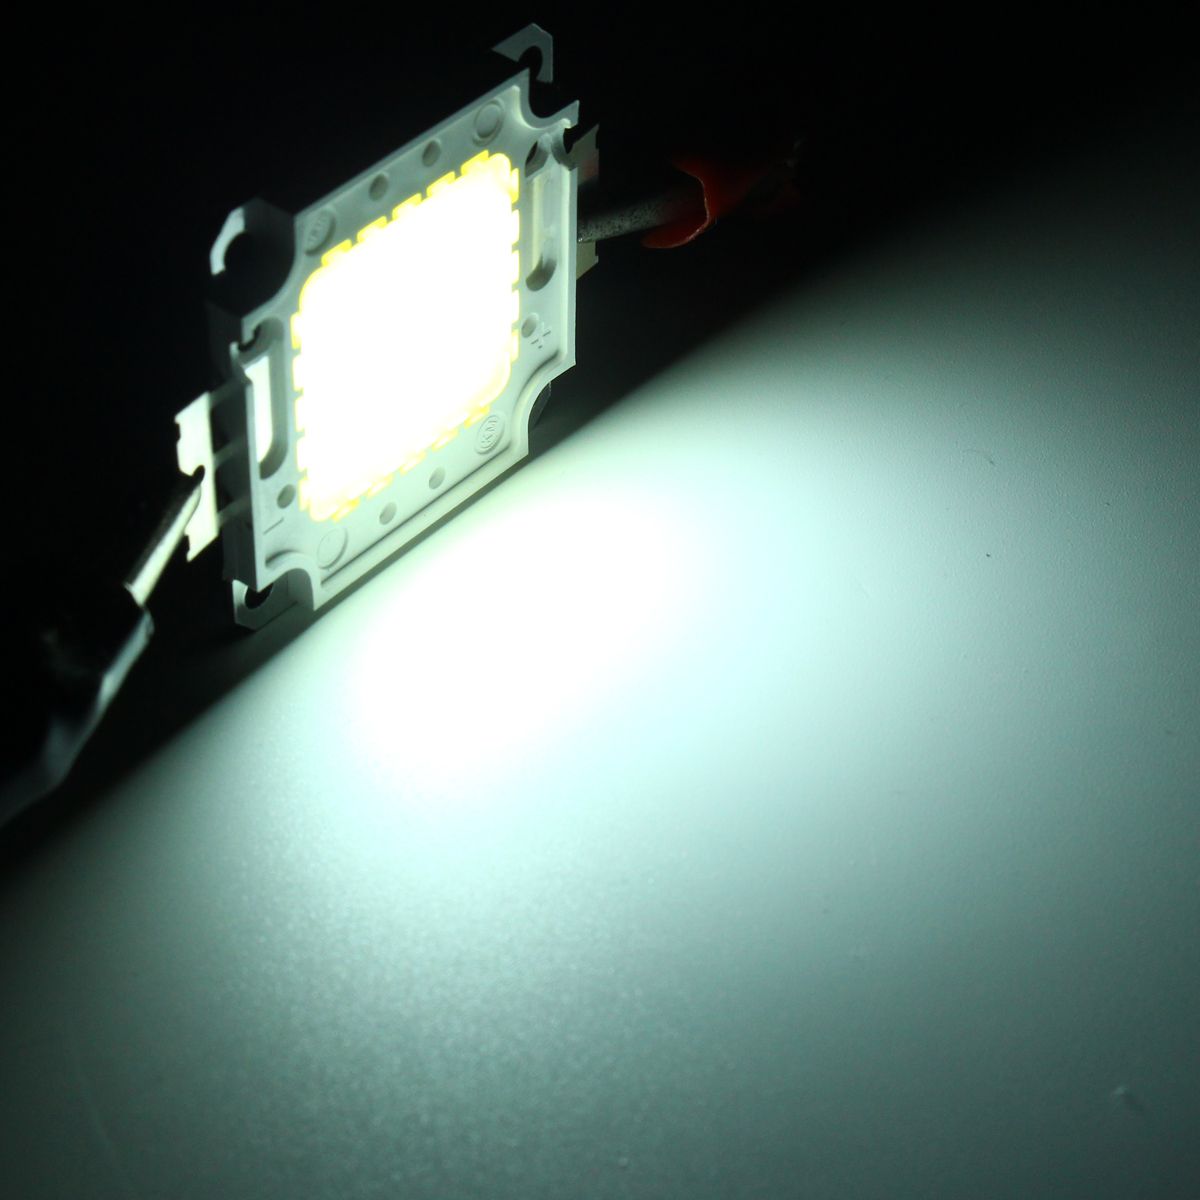 Waterproof-High-Power-13W-LED-Driver-Supply-SMD-Chip-for-Flood-Light-AC85-265V-1160537